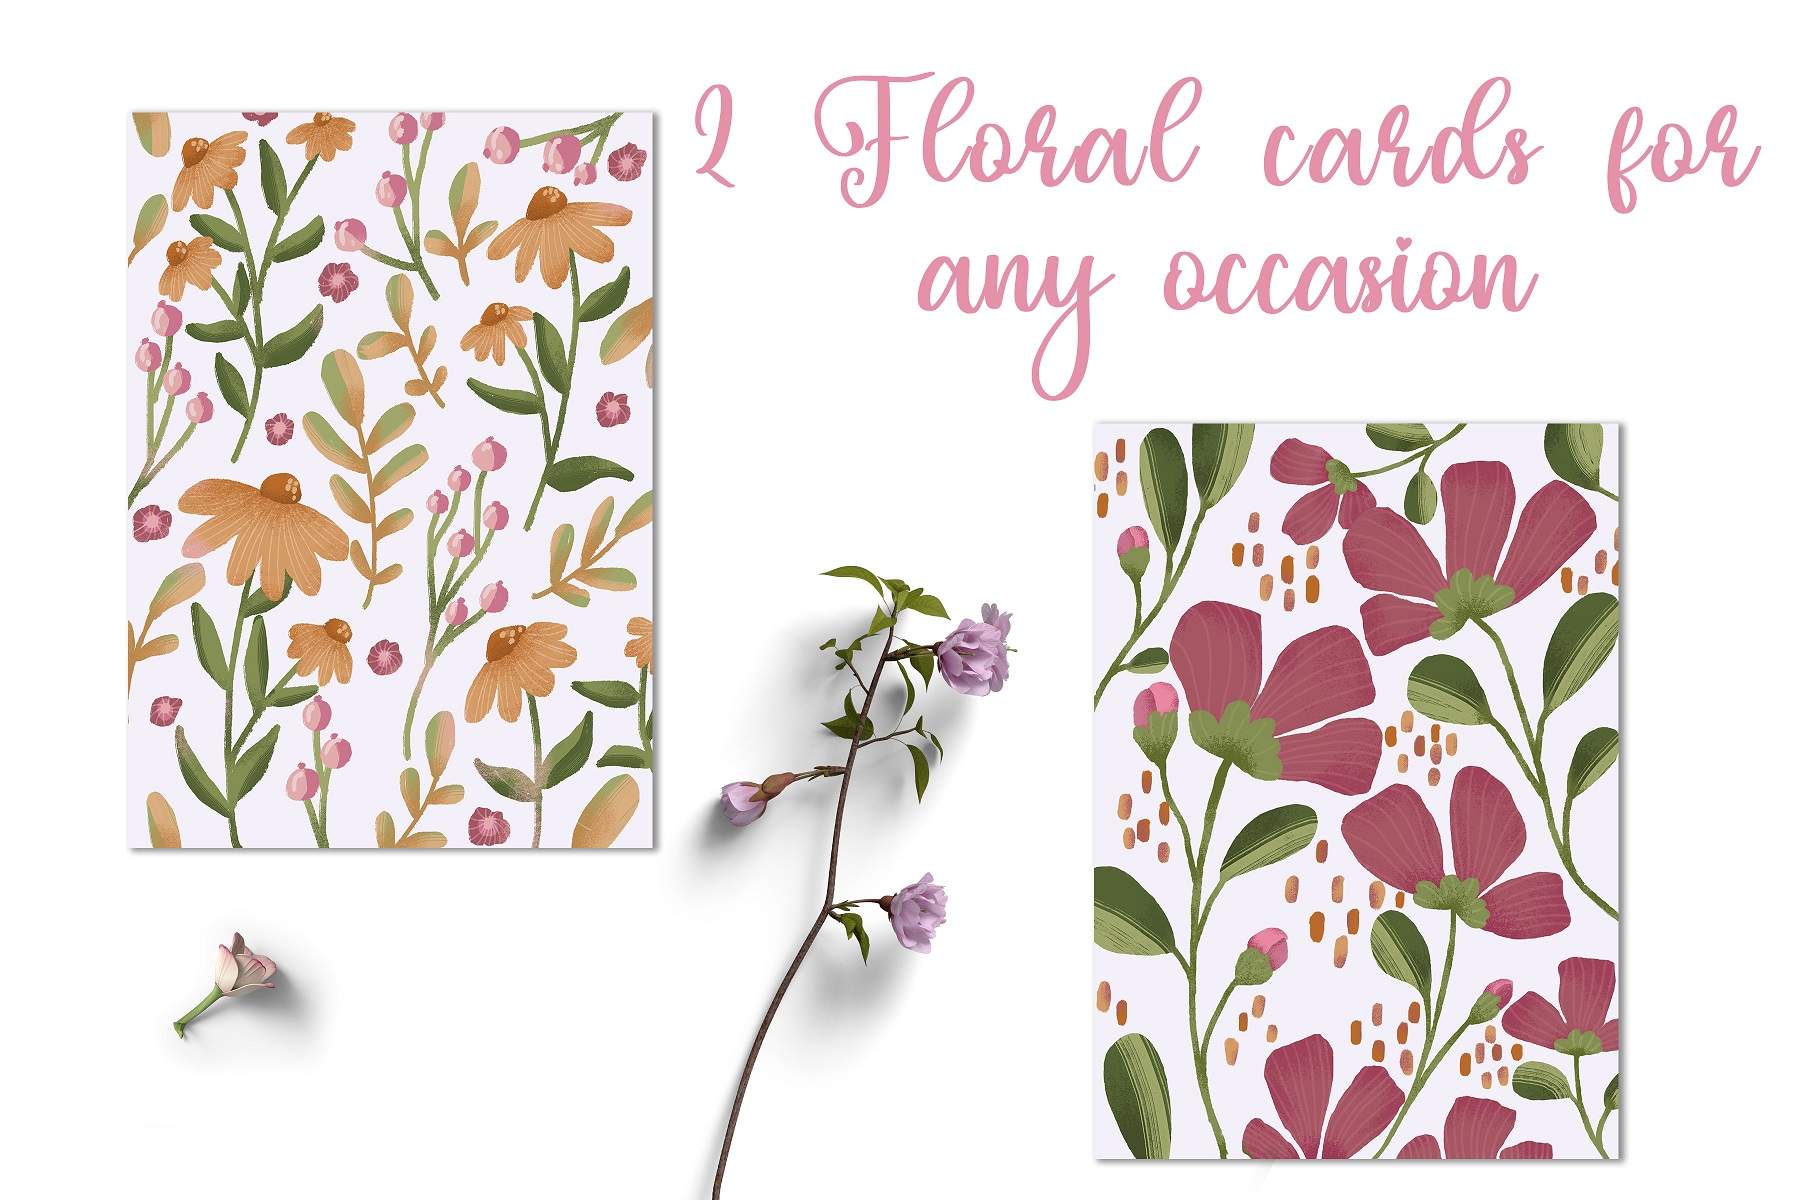 Three floral cards for any occasion.